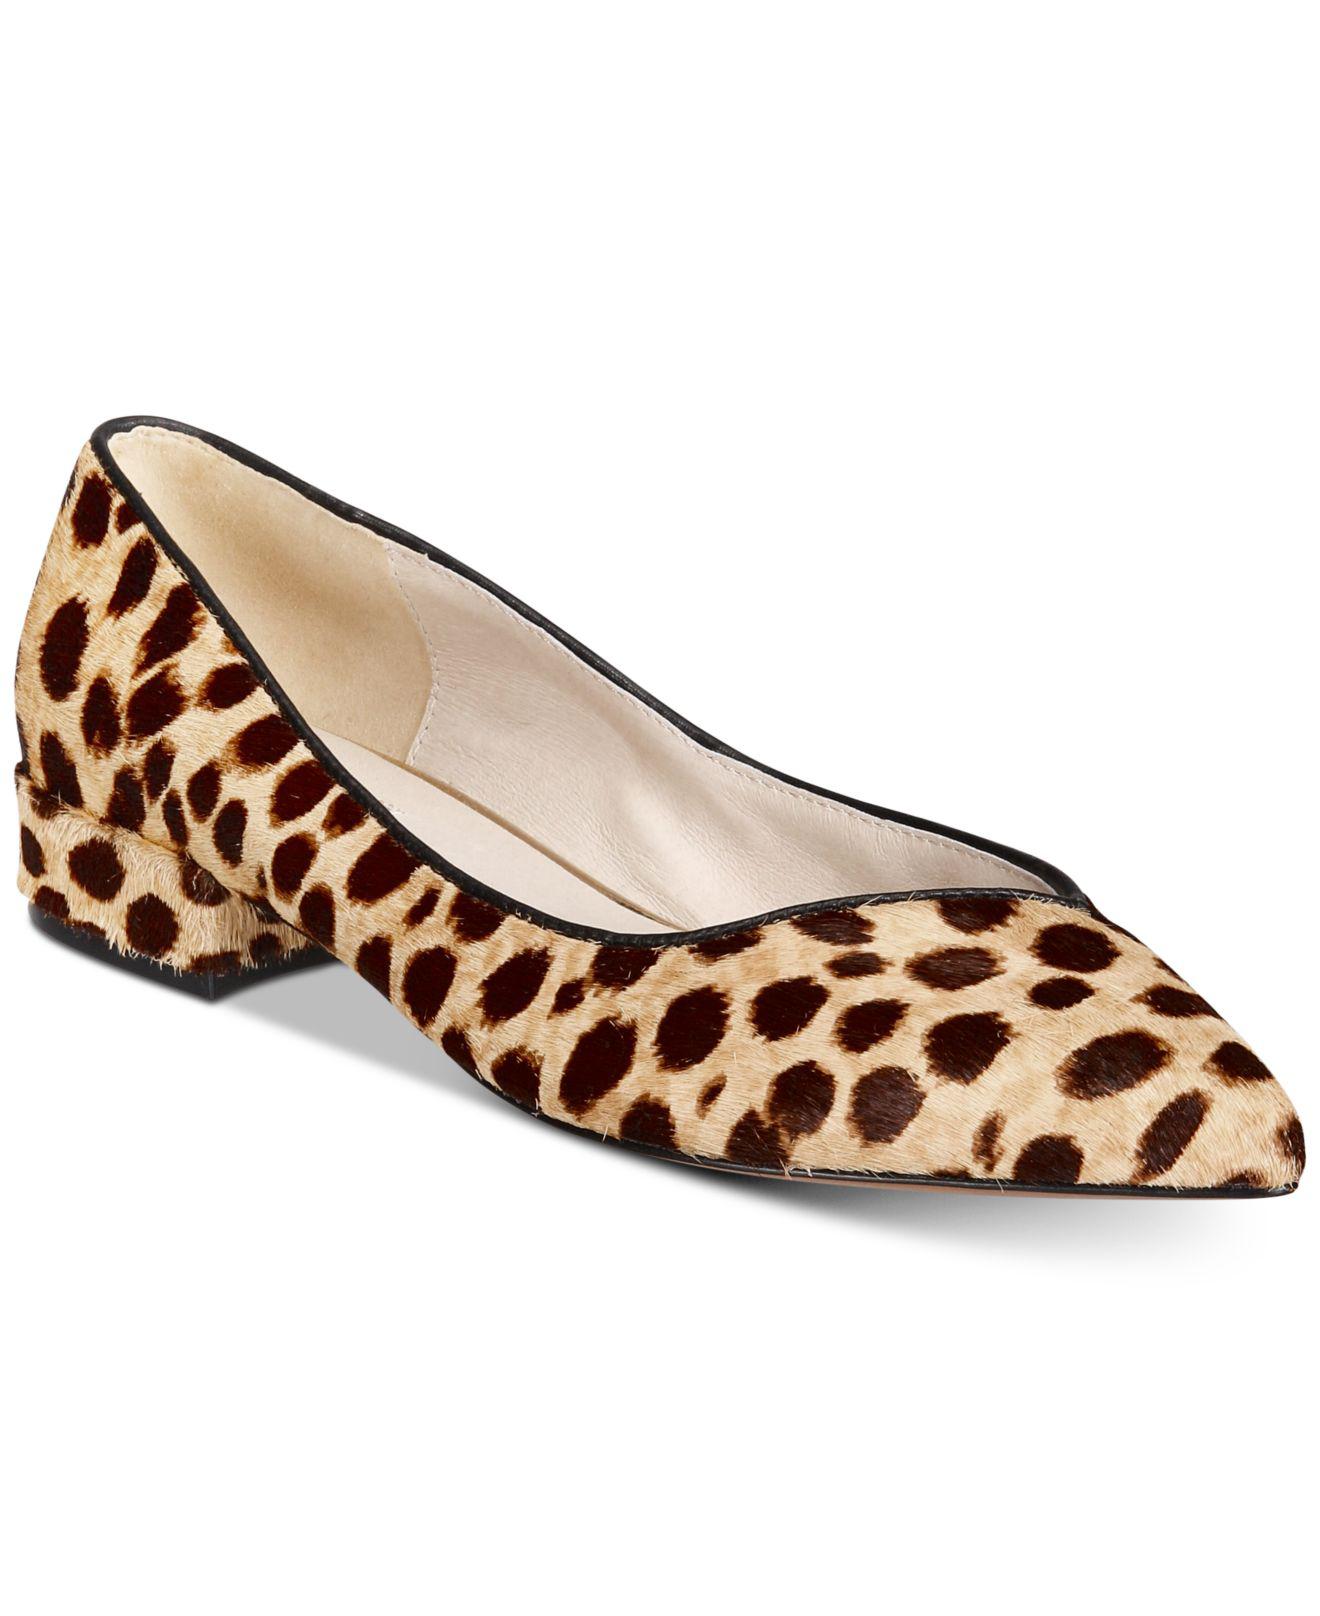 kenneth cole leopard flats